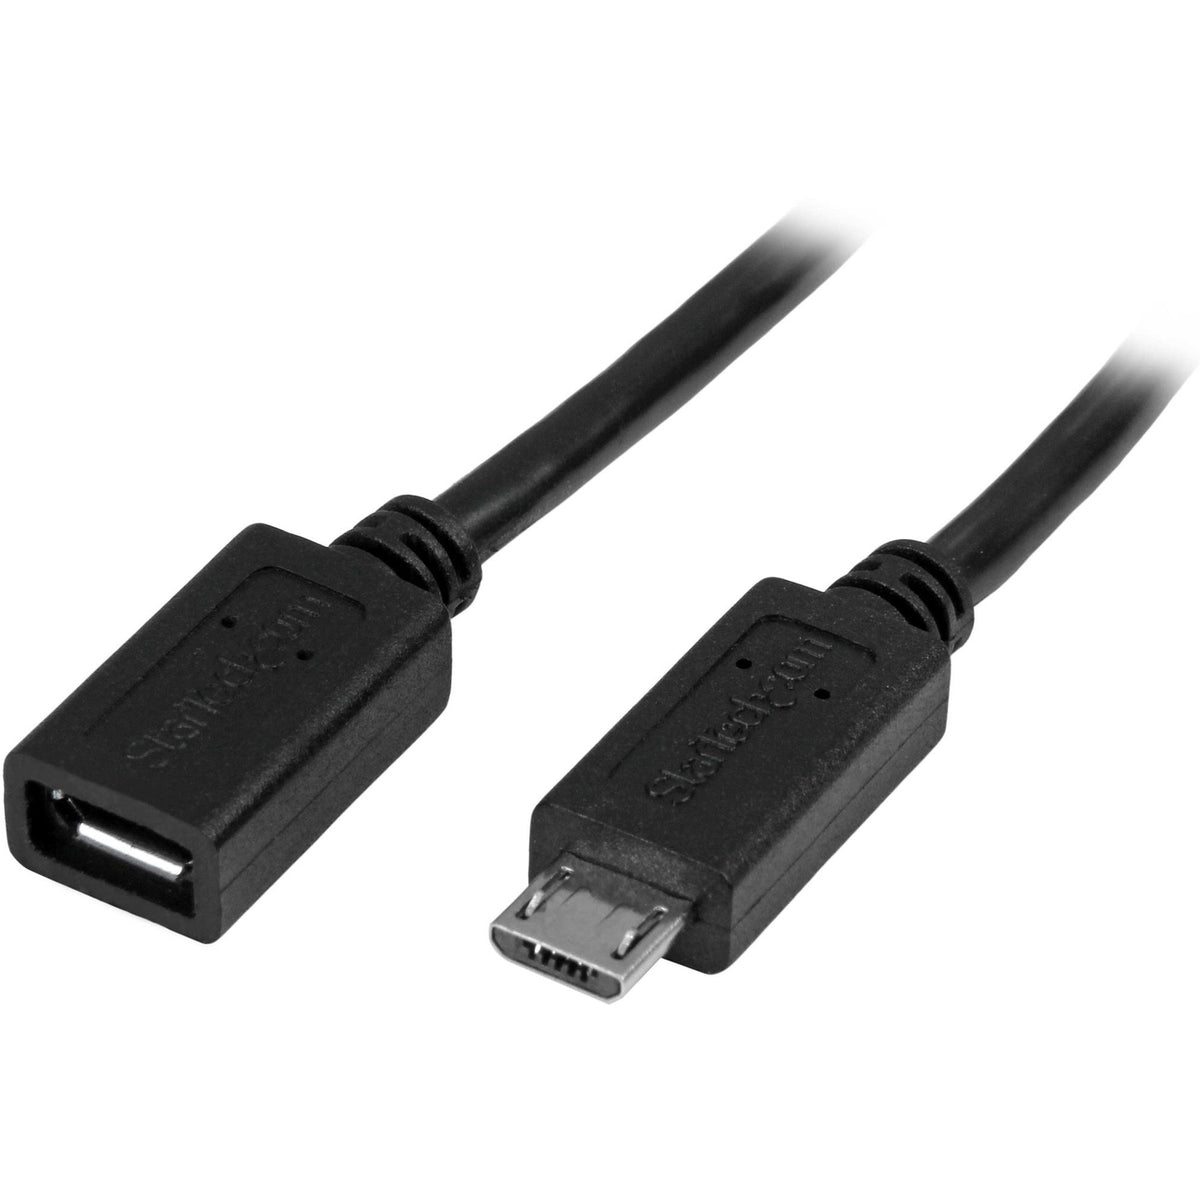 StarTech.com 0.5m 20in Micro-USB Extension Cable - M/F - Micro USB Male to Micro USB Female Cable - USBUBEXT50CM